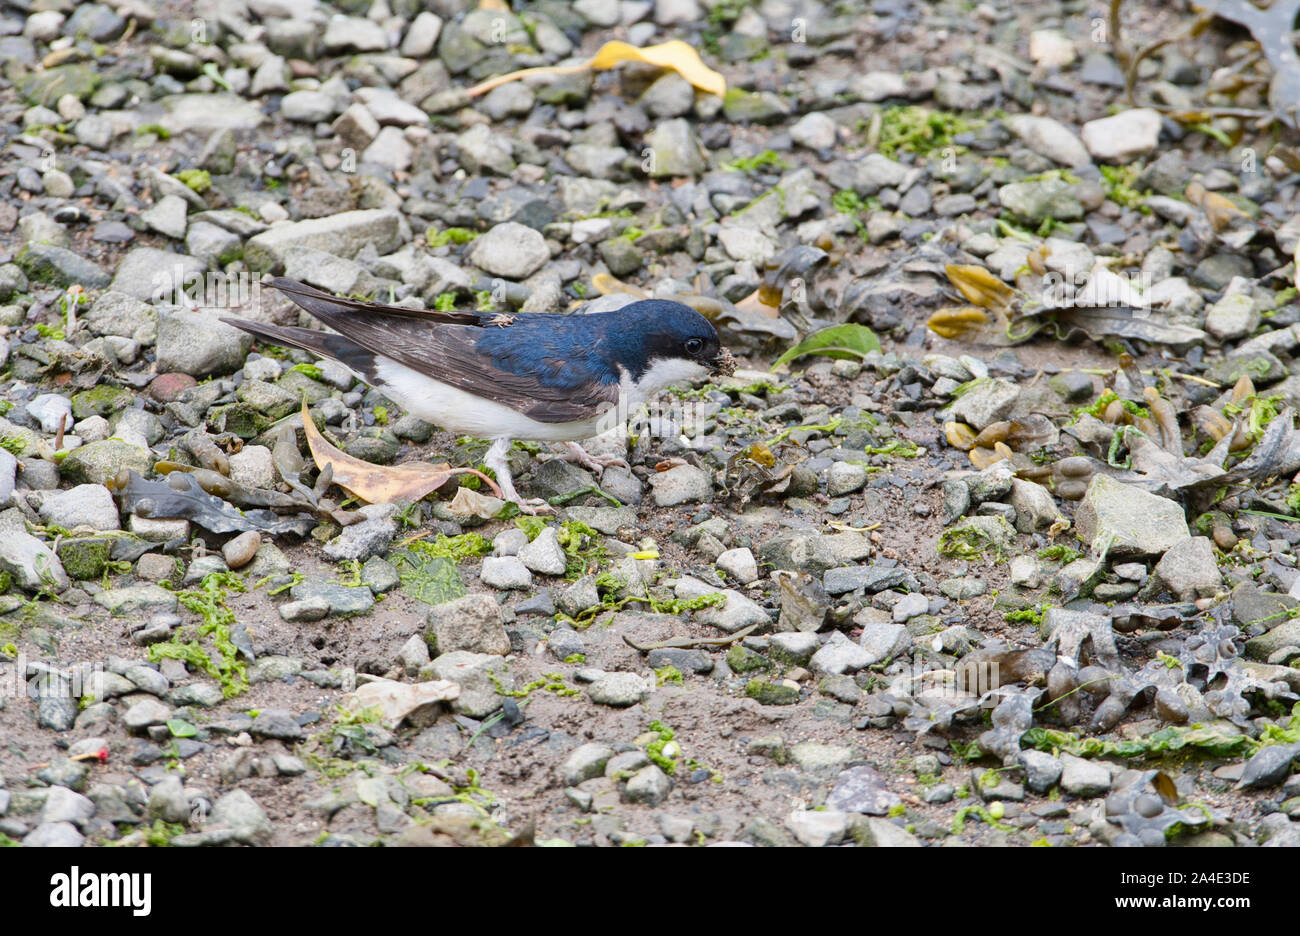 House martin (Delichon urbicum) with mud for nest building, Dyfed, Wales. A parasitic louse-fly (Crataerina hirundinis) can be seen on the bird's back. Stock Photo